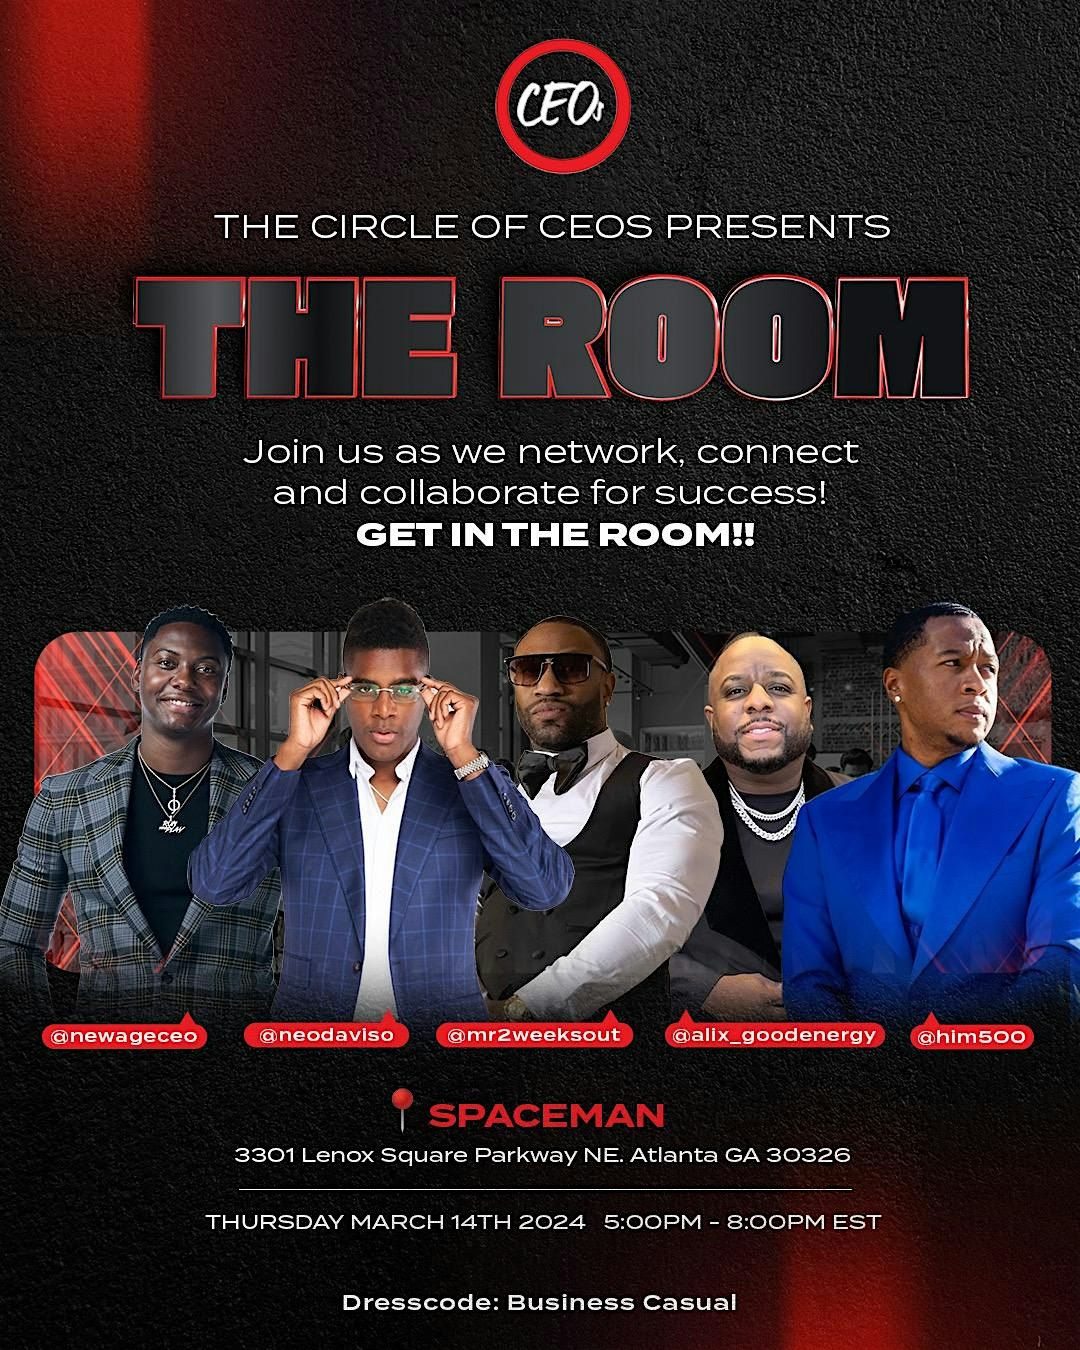 The Circle of CEOs present THE ROOM